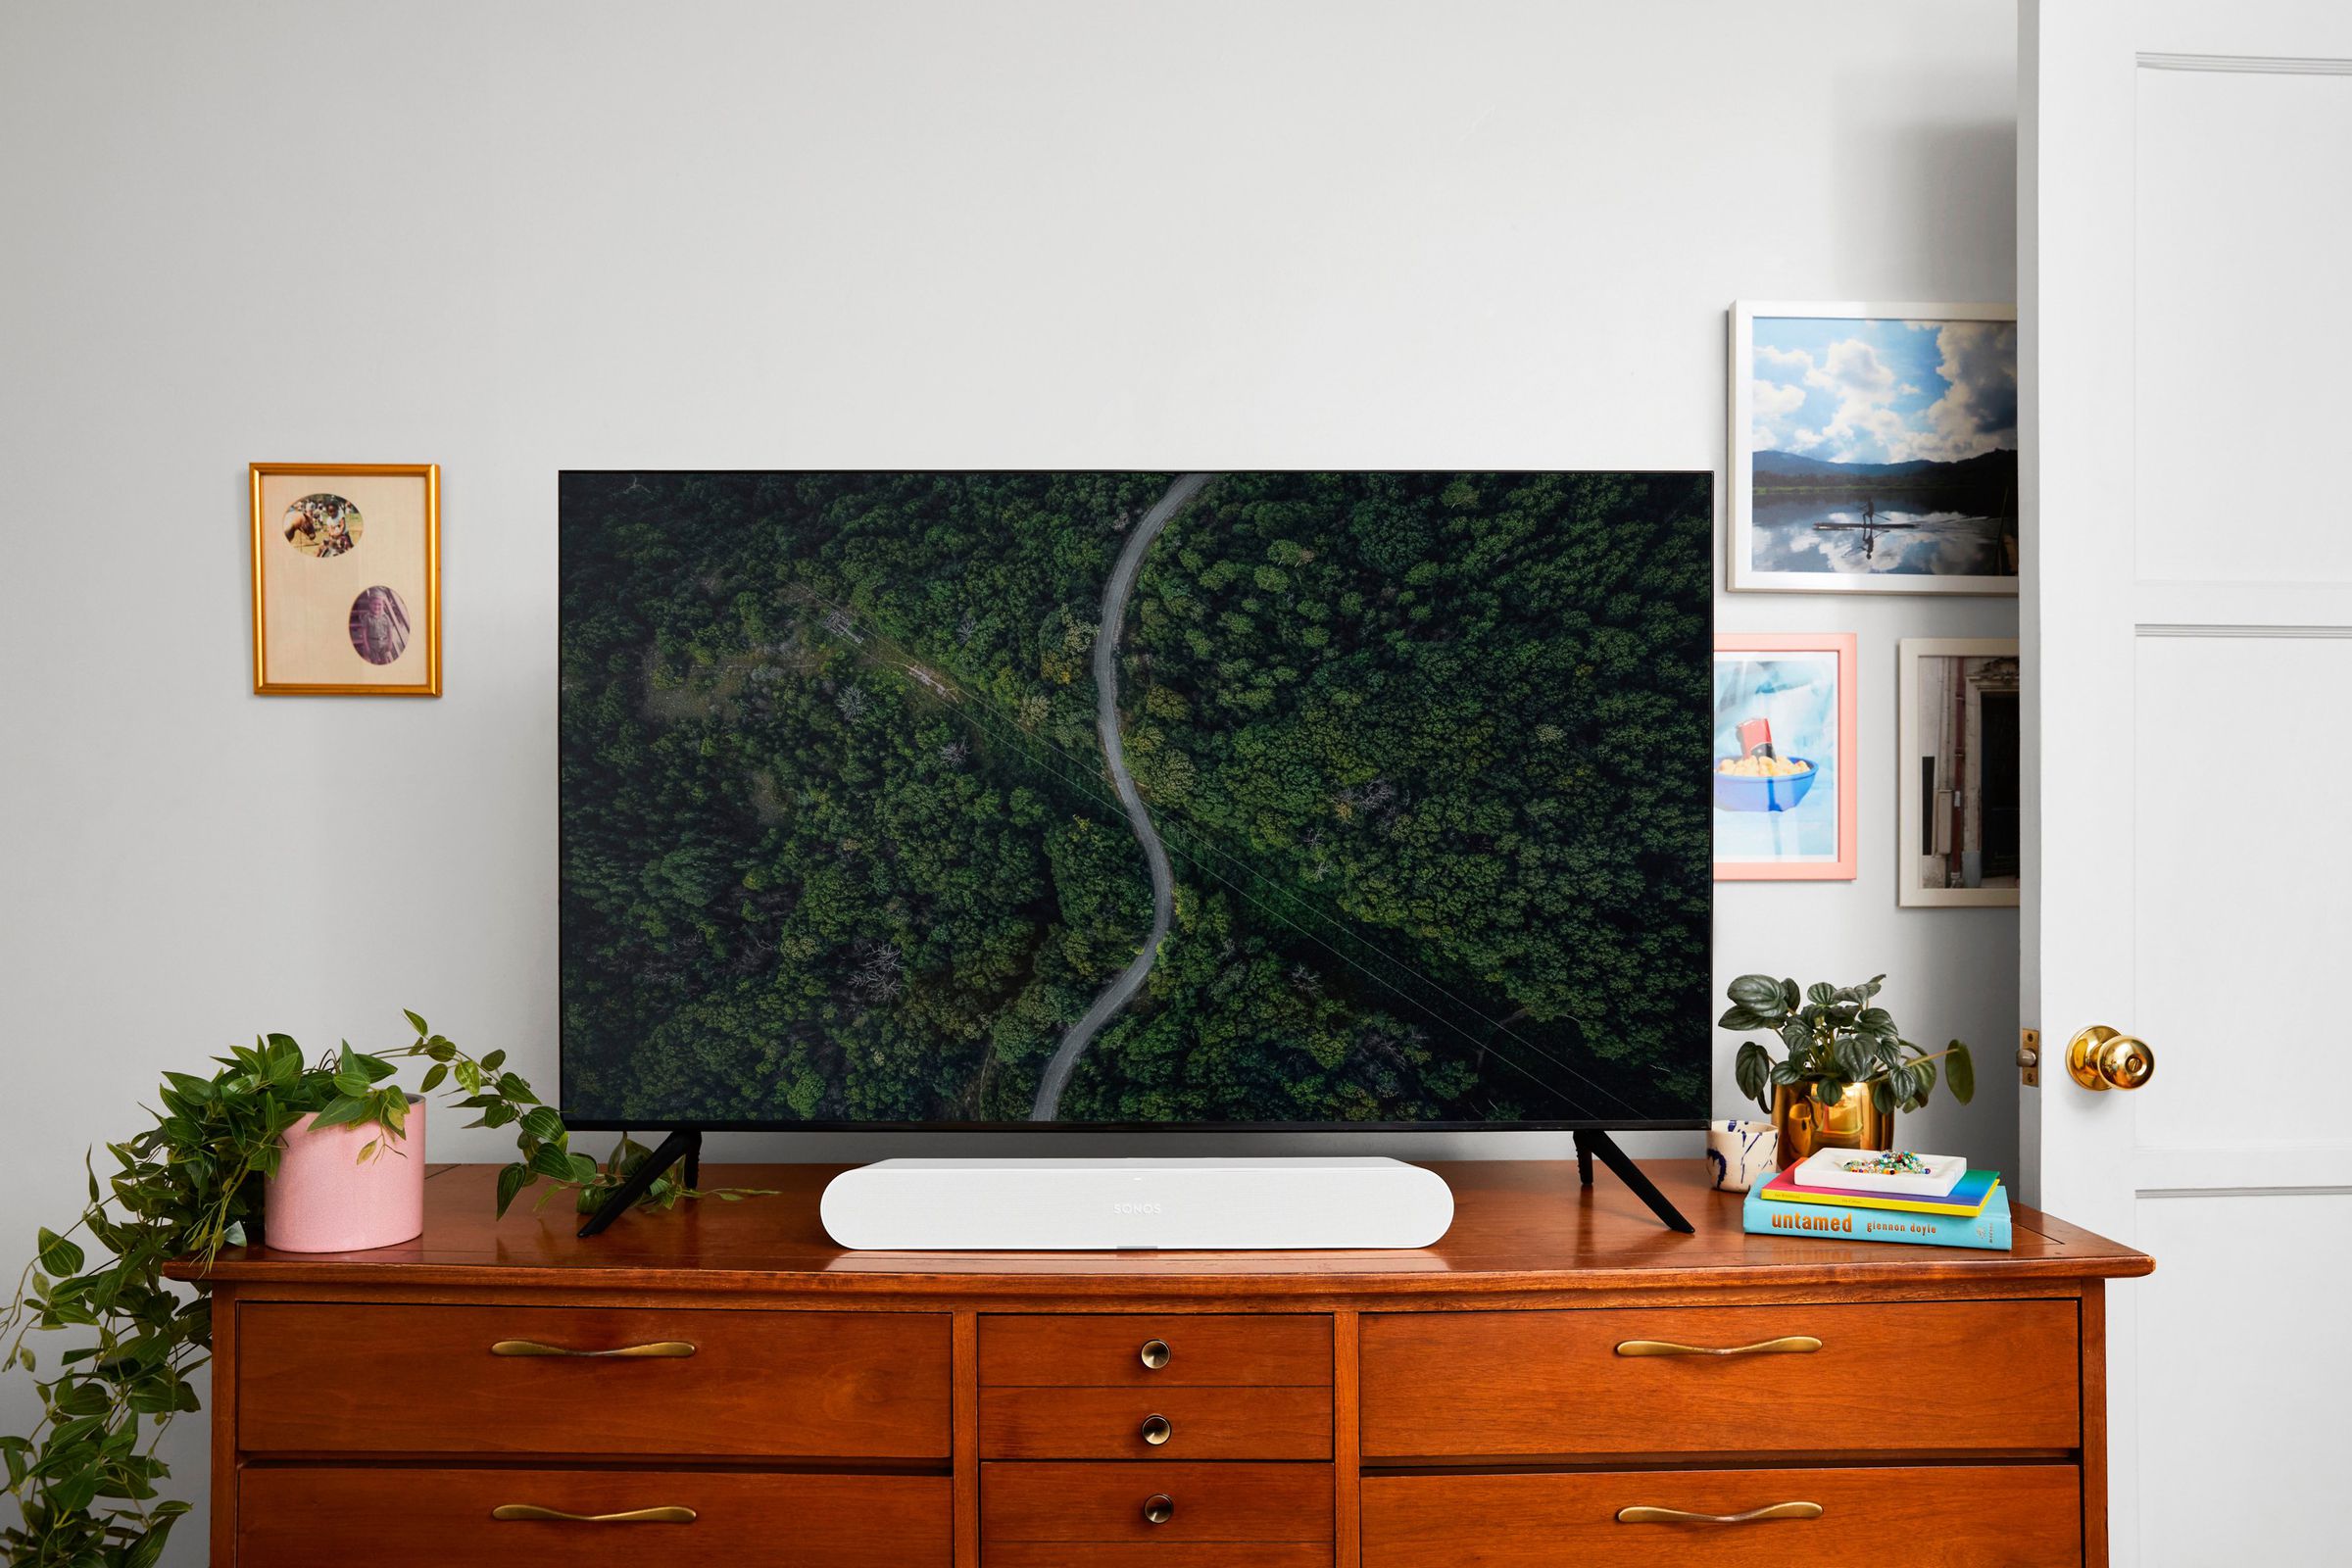 Like other Sonos soundbars, the Ray will come in black or white.